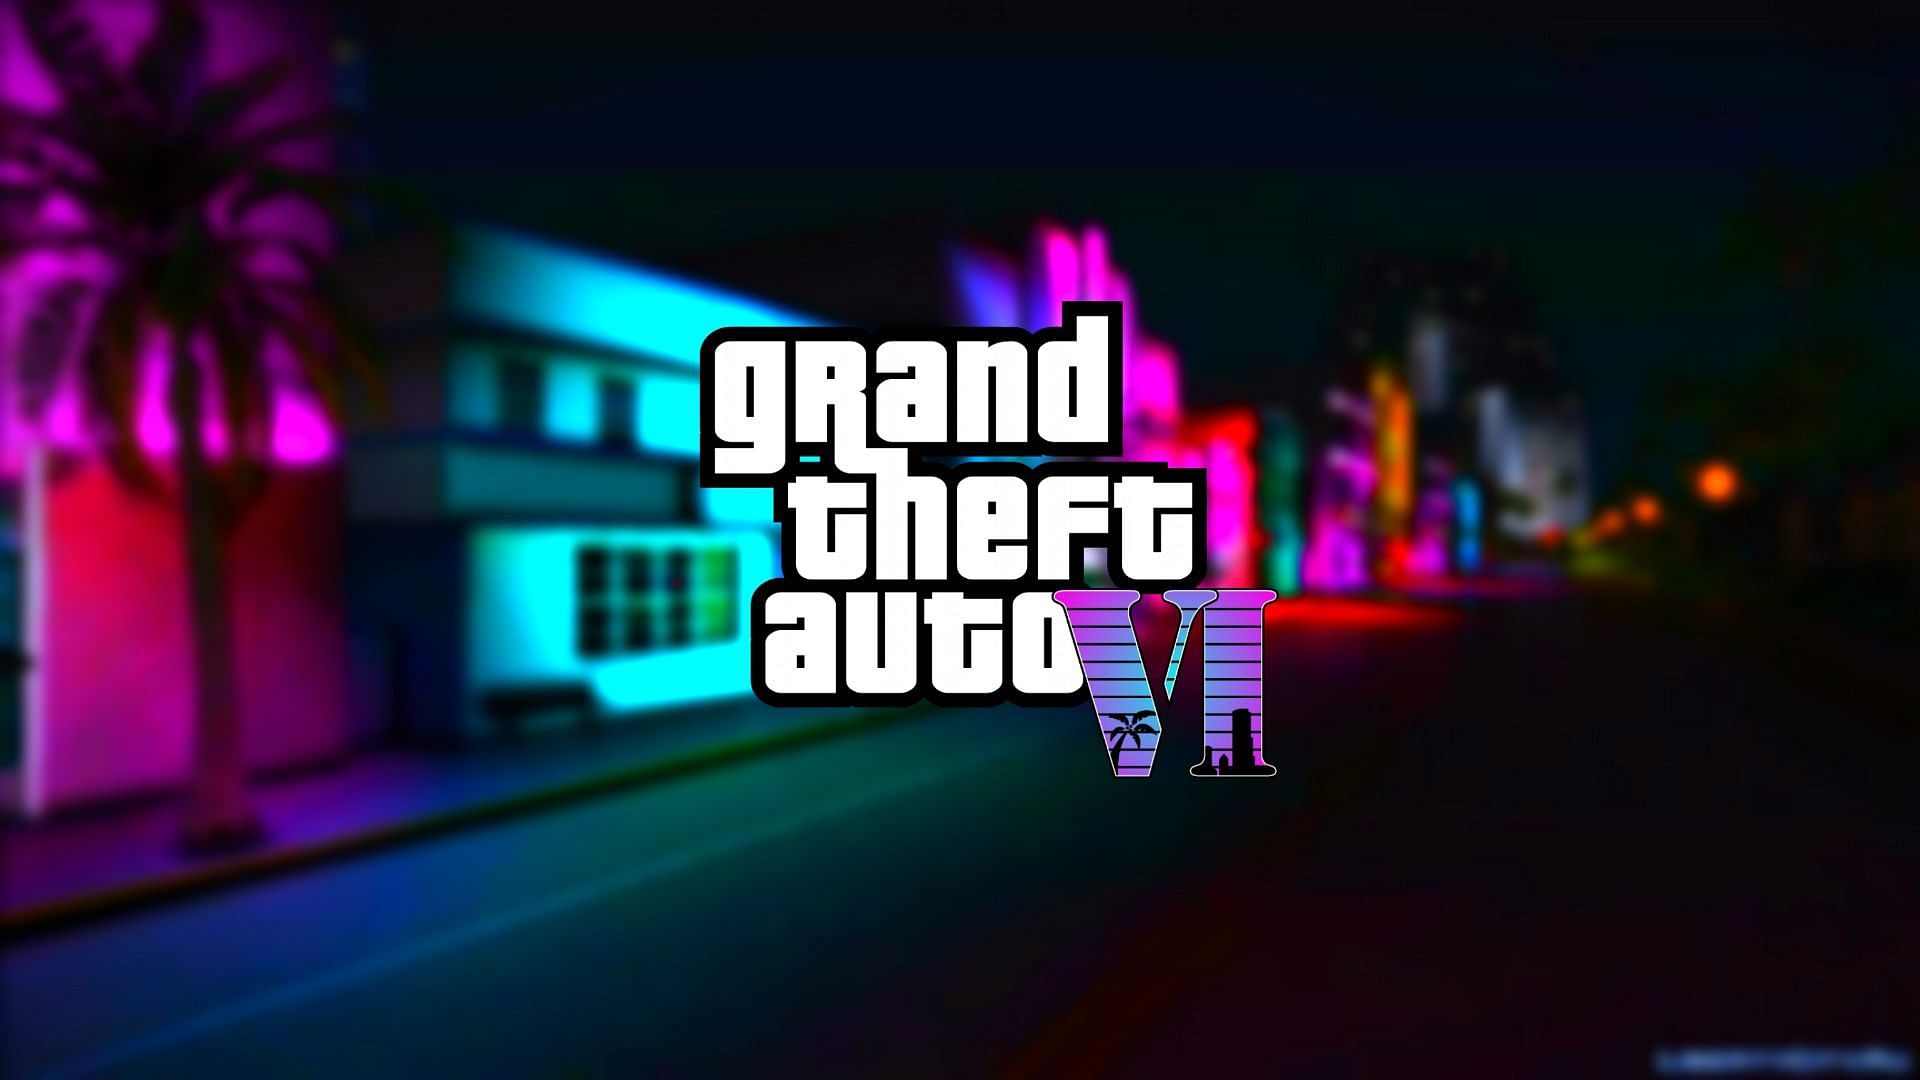 Fans are expecting GTA 6 to be announced soon (Image via Rockstar Games)